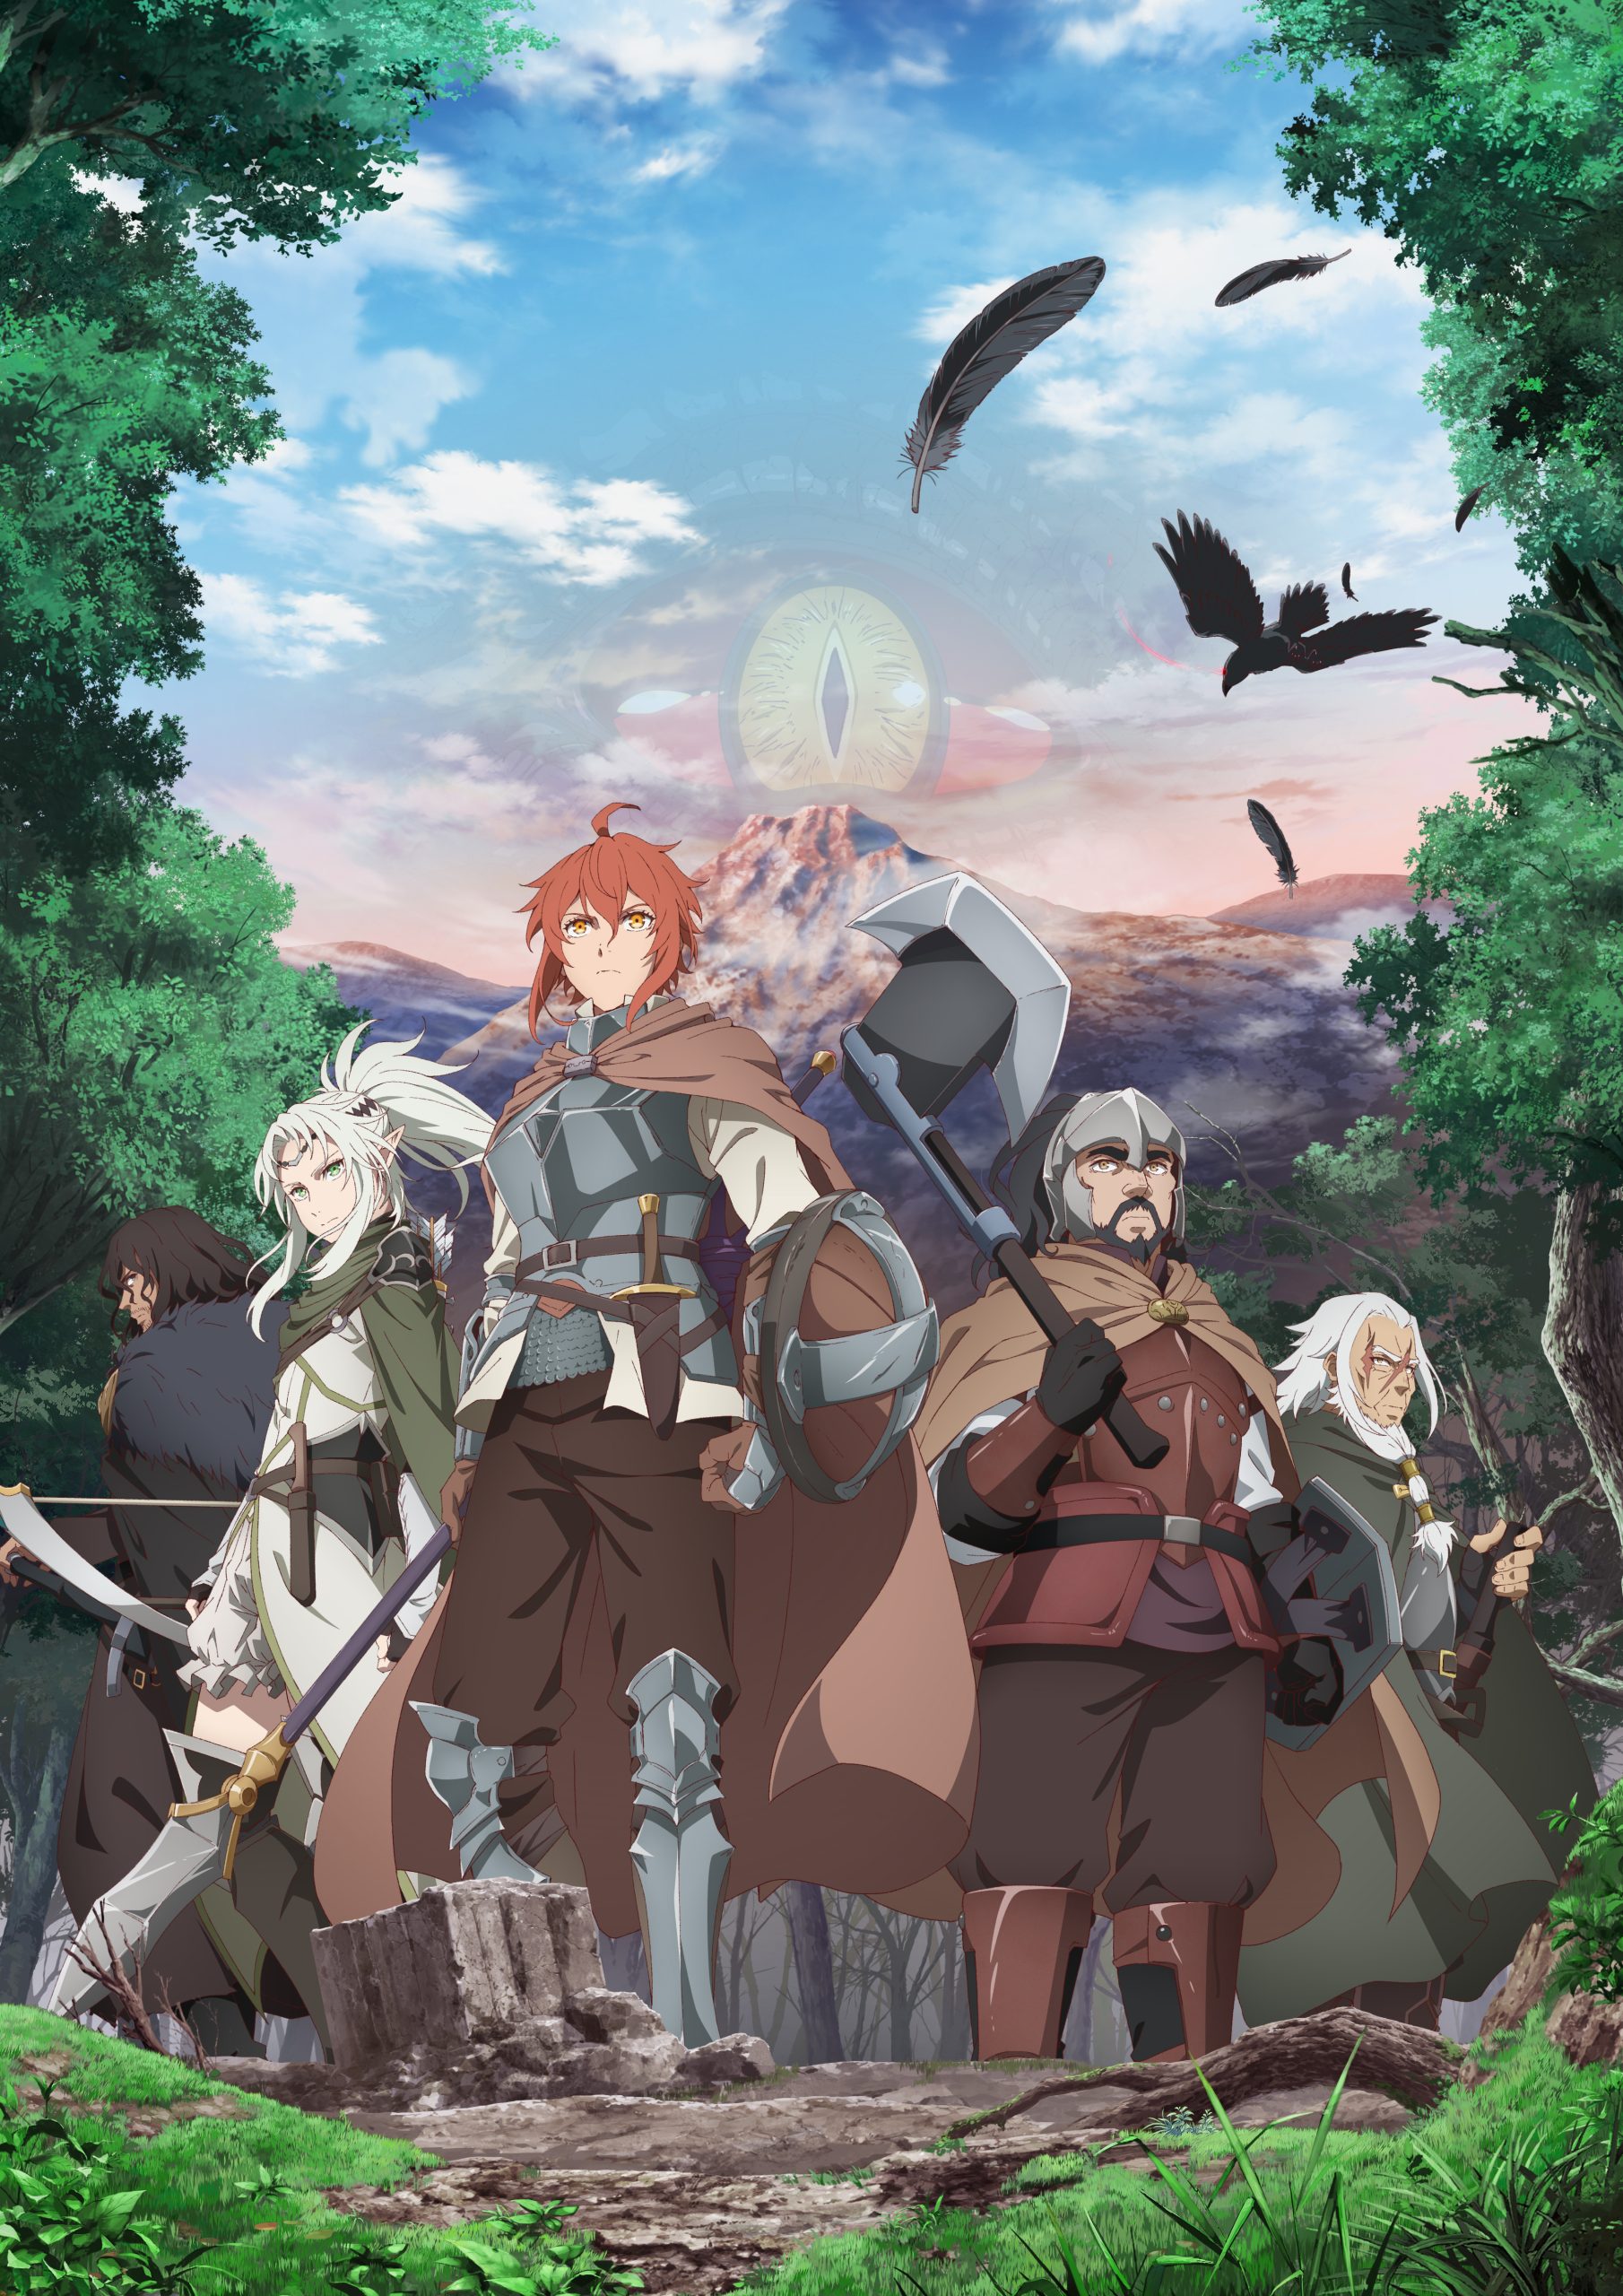 Crunchyroll Announces 9 New Acquisitions At Anime Expo; Including